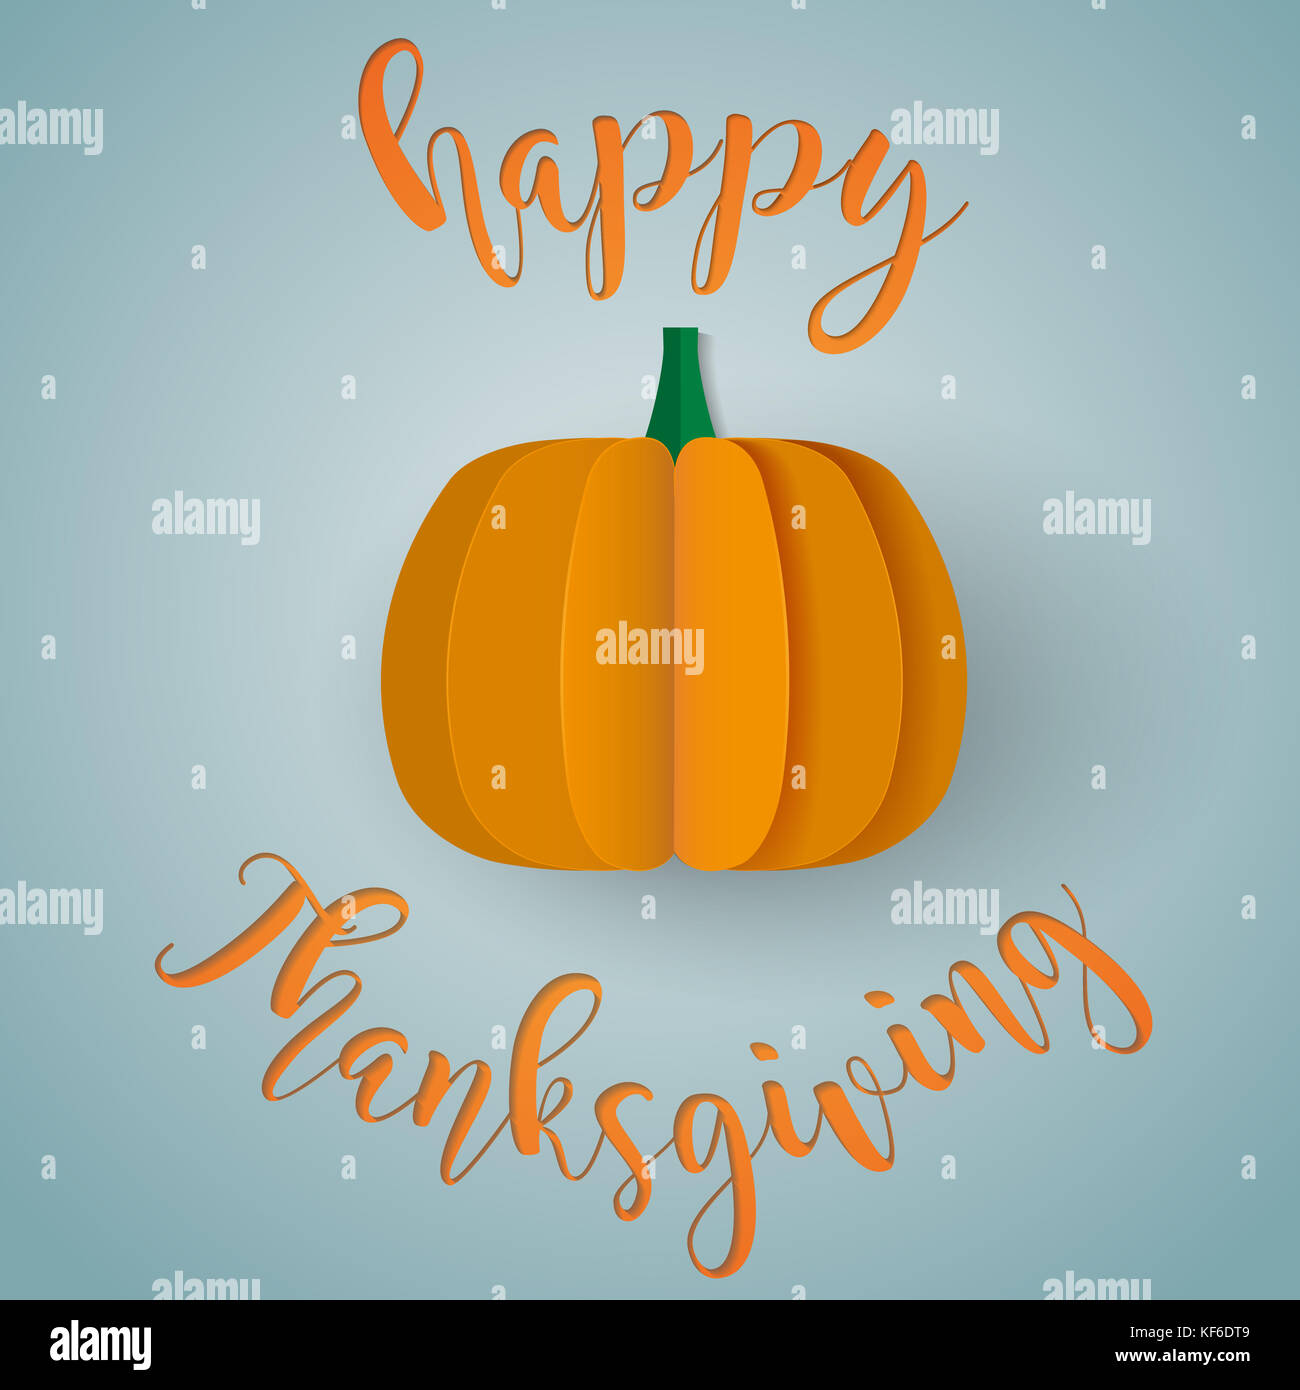 Happy thanksgiving card with paper cut style pumpkins Stock Photo